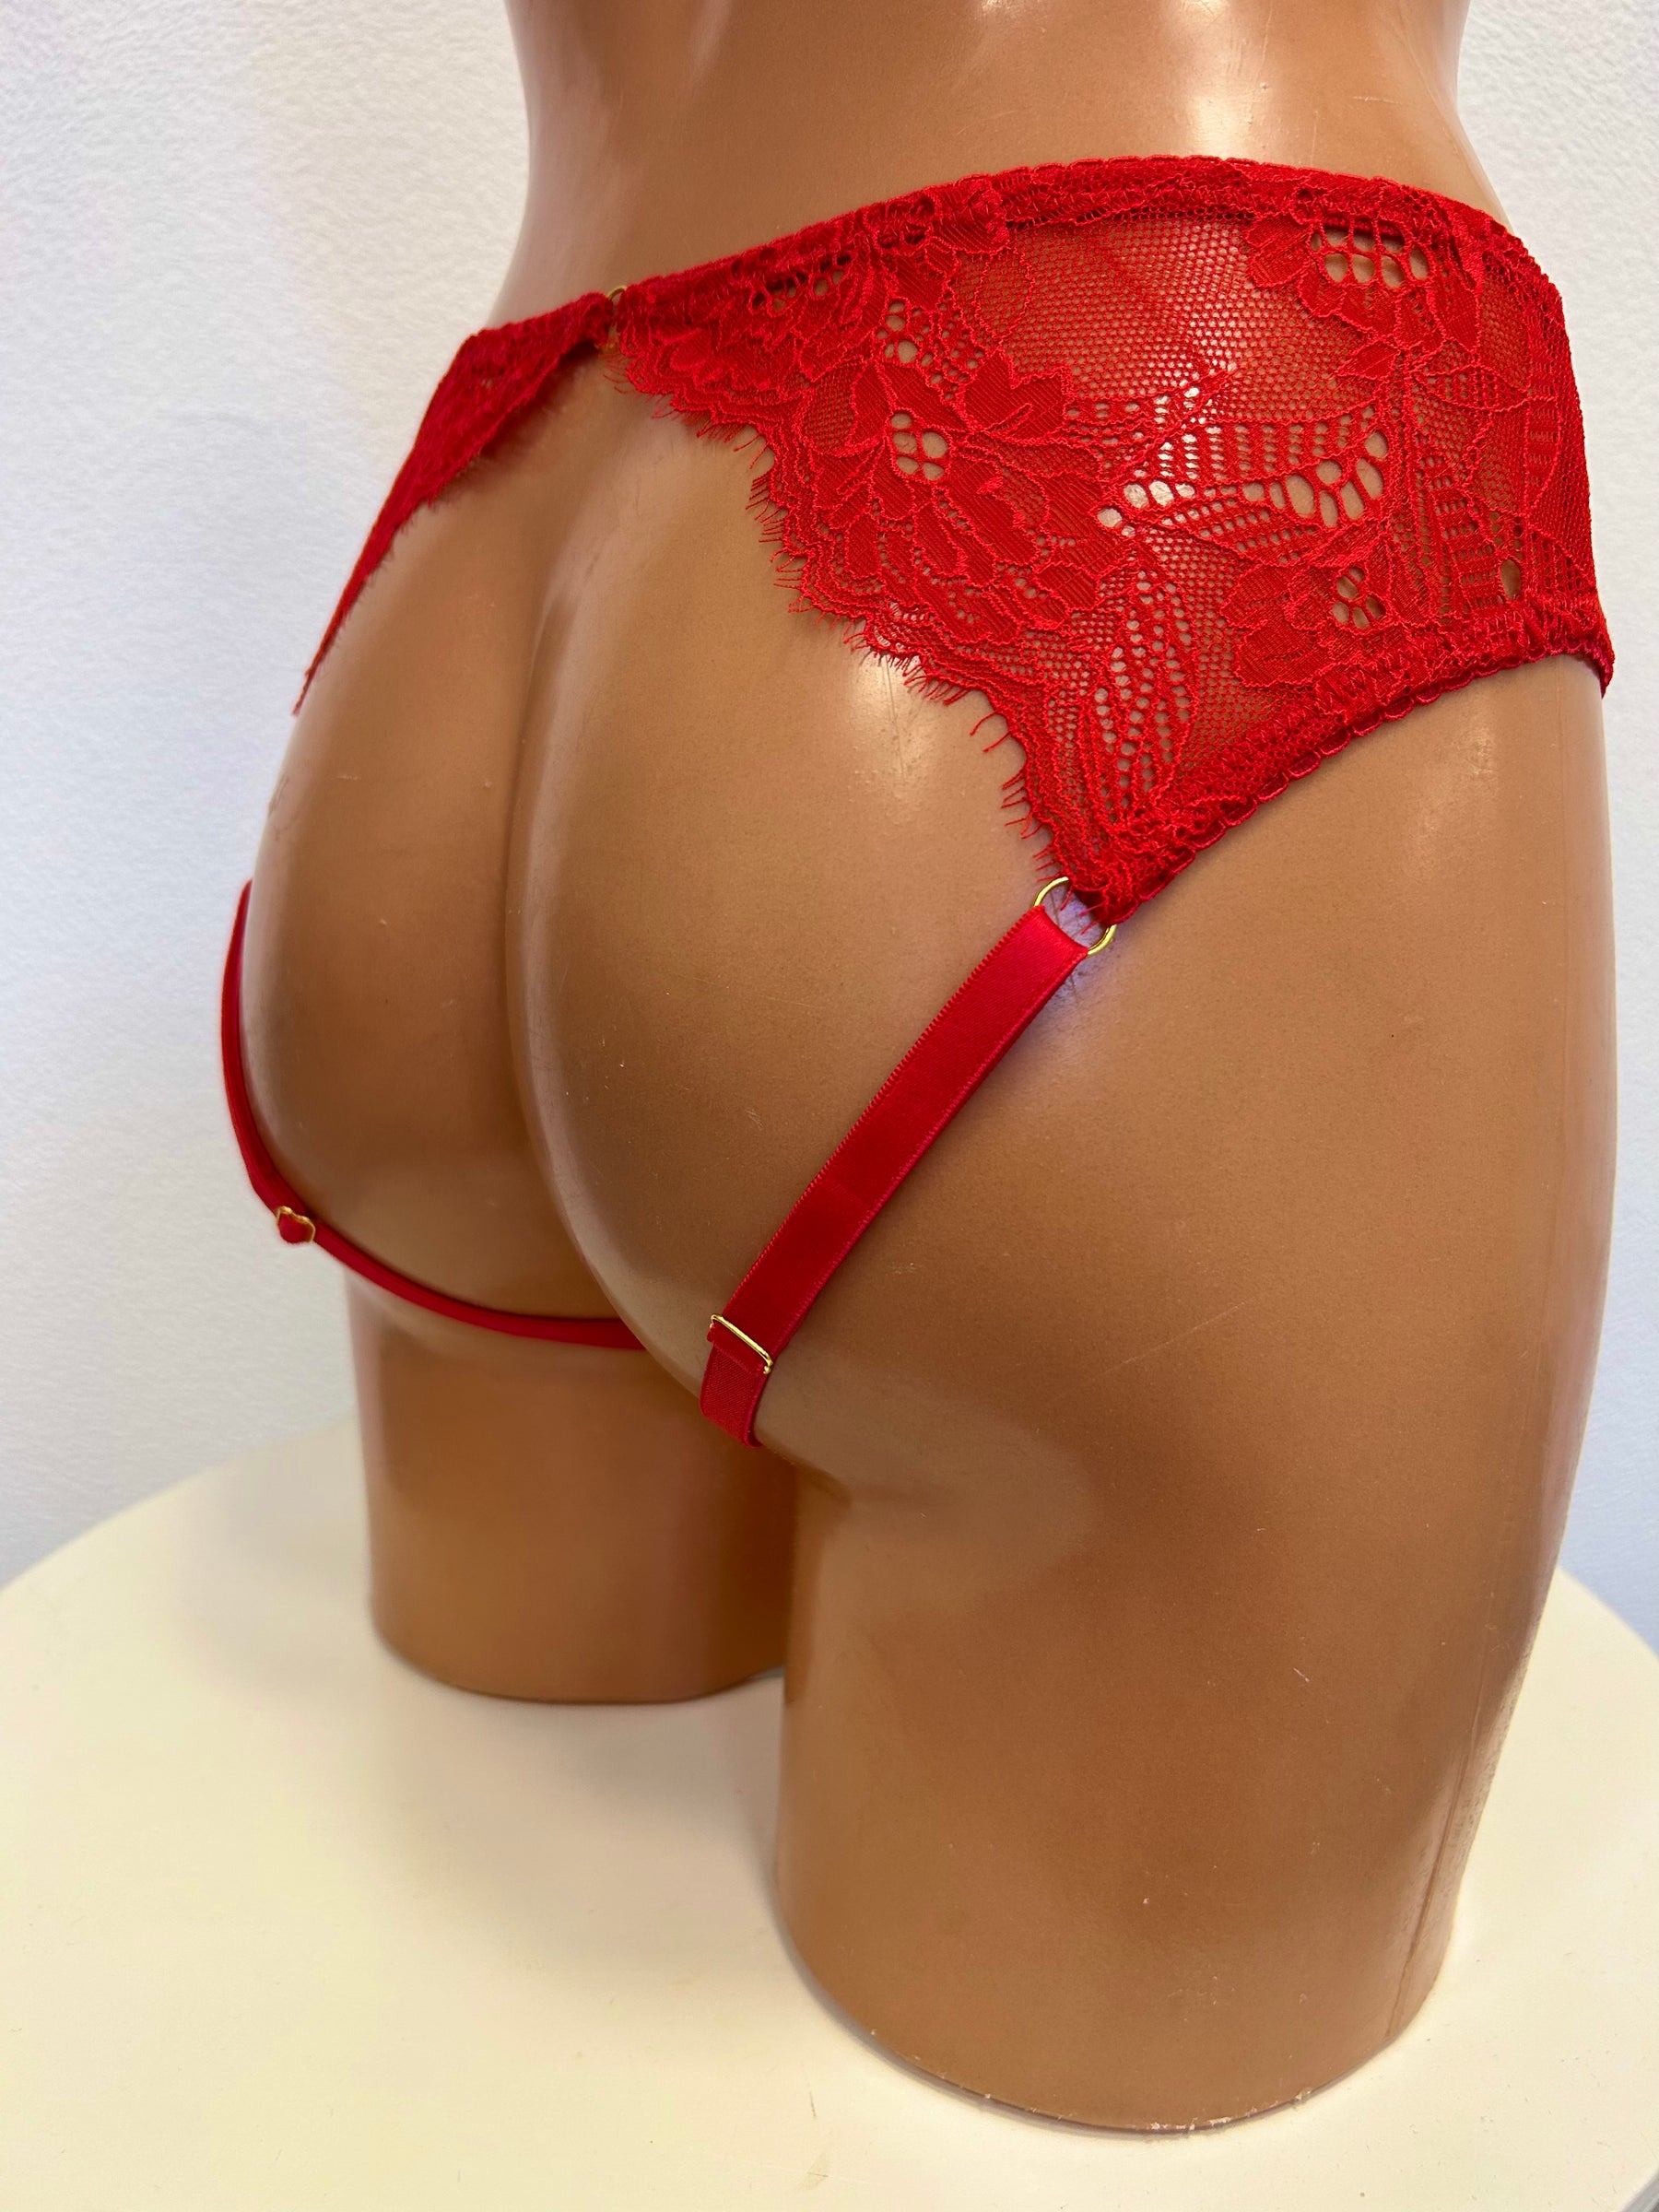 "Misbehave" Crotchless panties